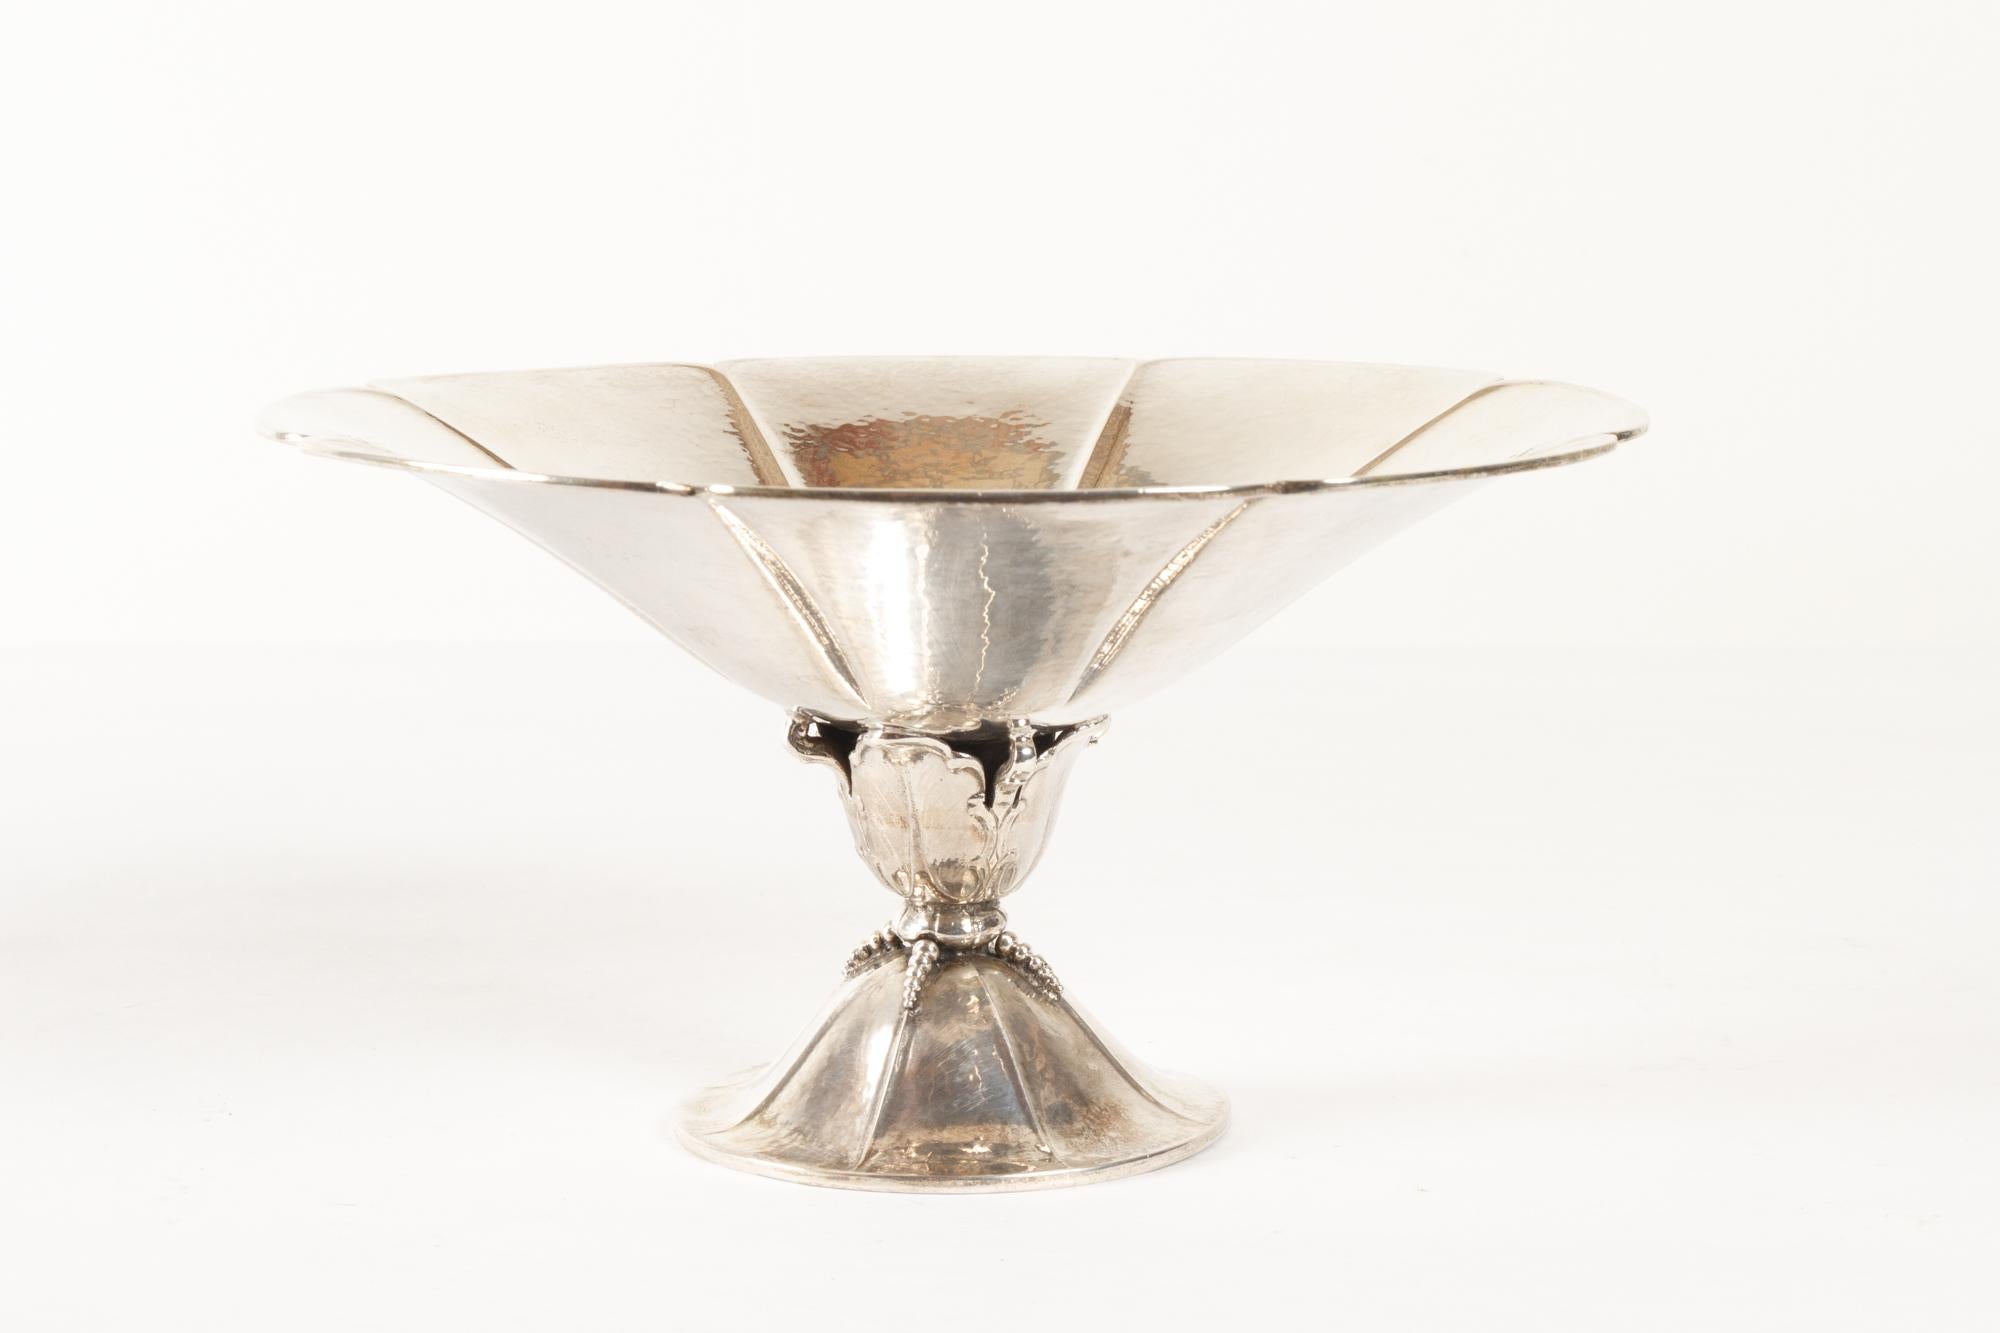 Danish Art Nouveau silver centerpiece, 1920s
Elegant and decorative centerpiece in hammered sterling silver, made by Danish silversmith HCF in 1922. Base with blossom decoration.
Stamped with HCF and three towers (Danish sterling silver mark).